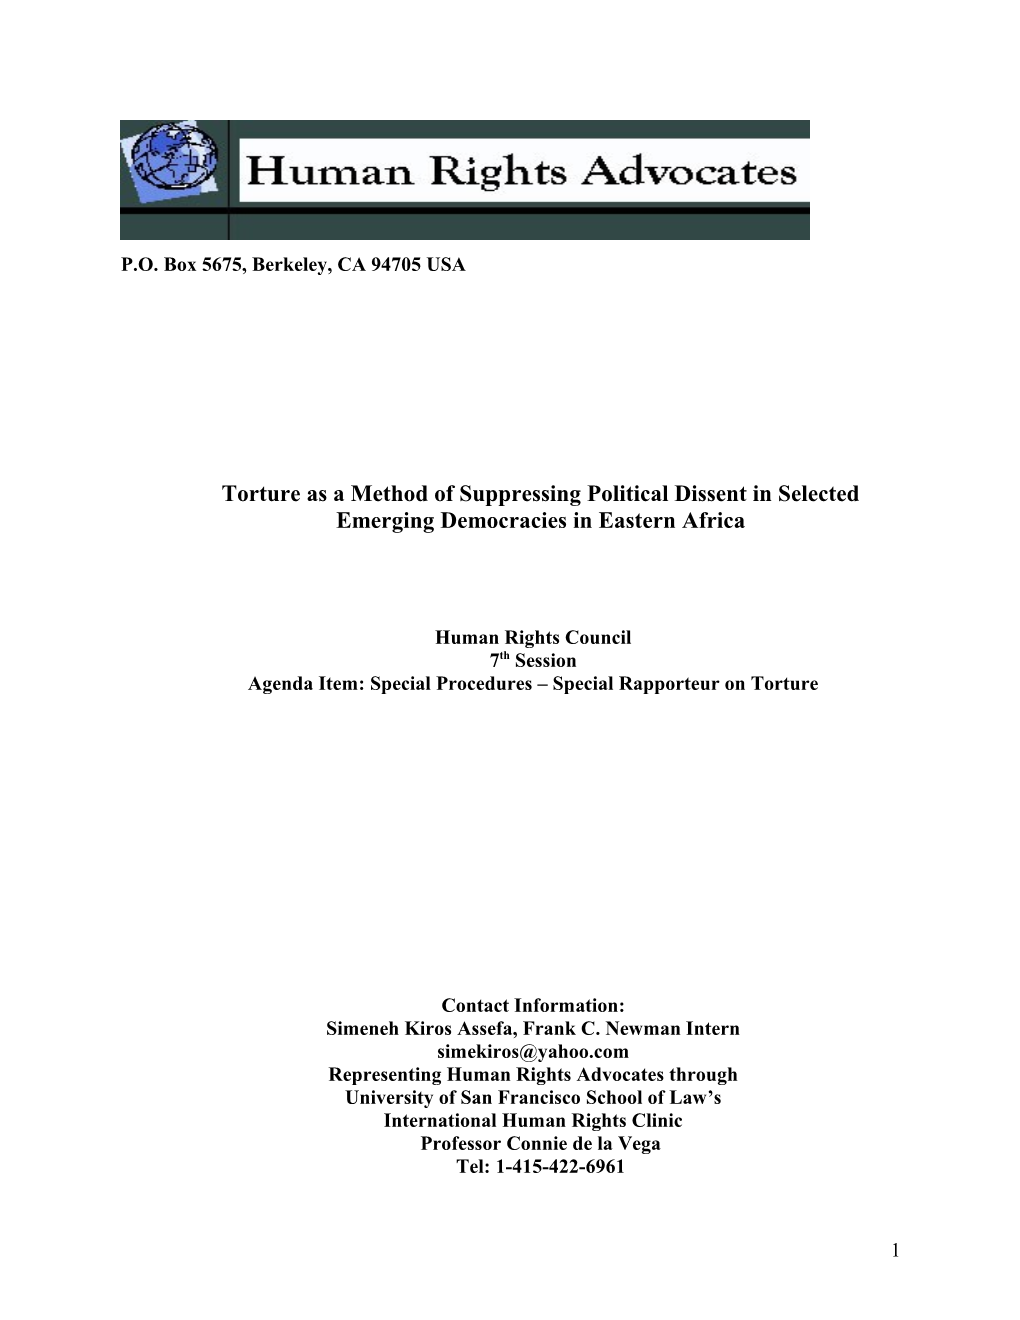 Torture As a Method of Suppressing Political Dissent in Selected Emerging Democracies